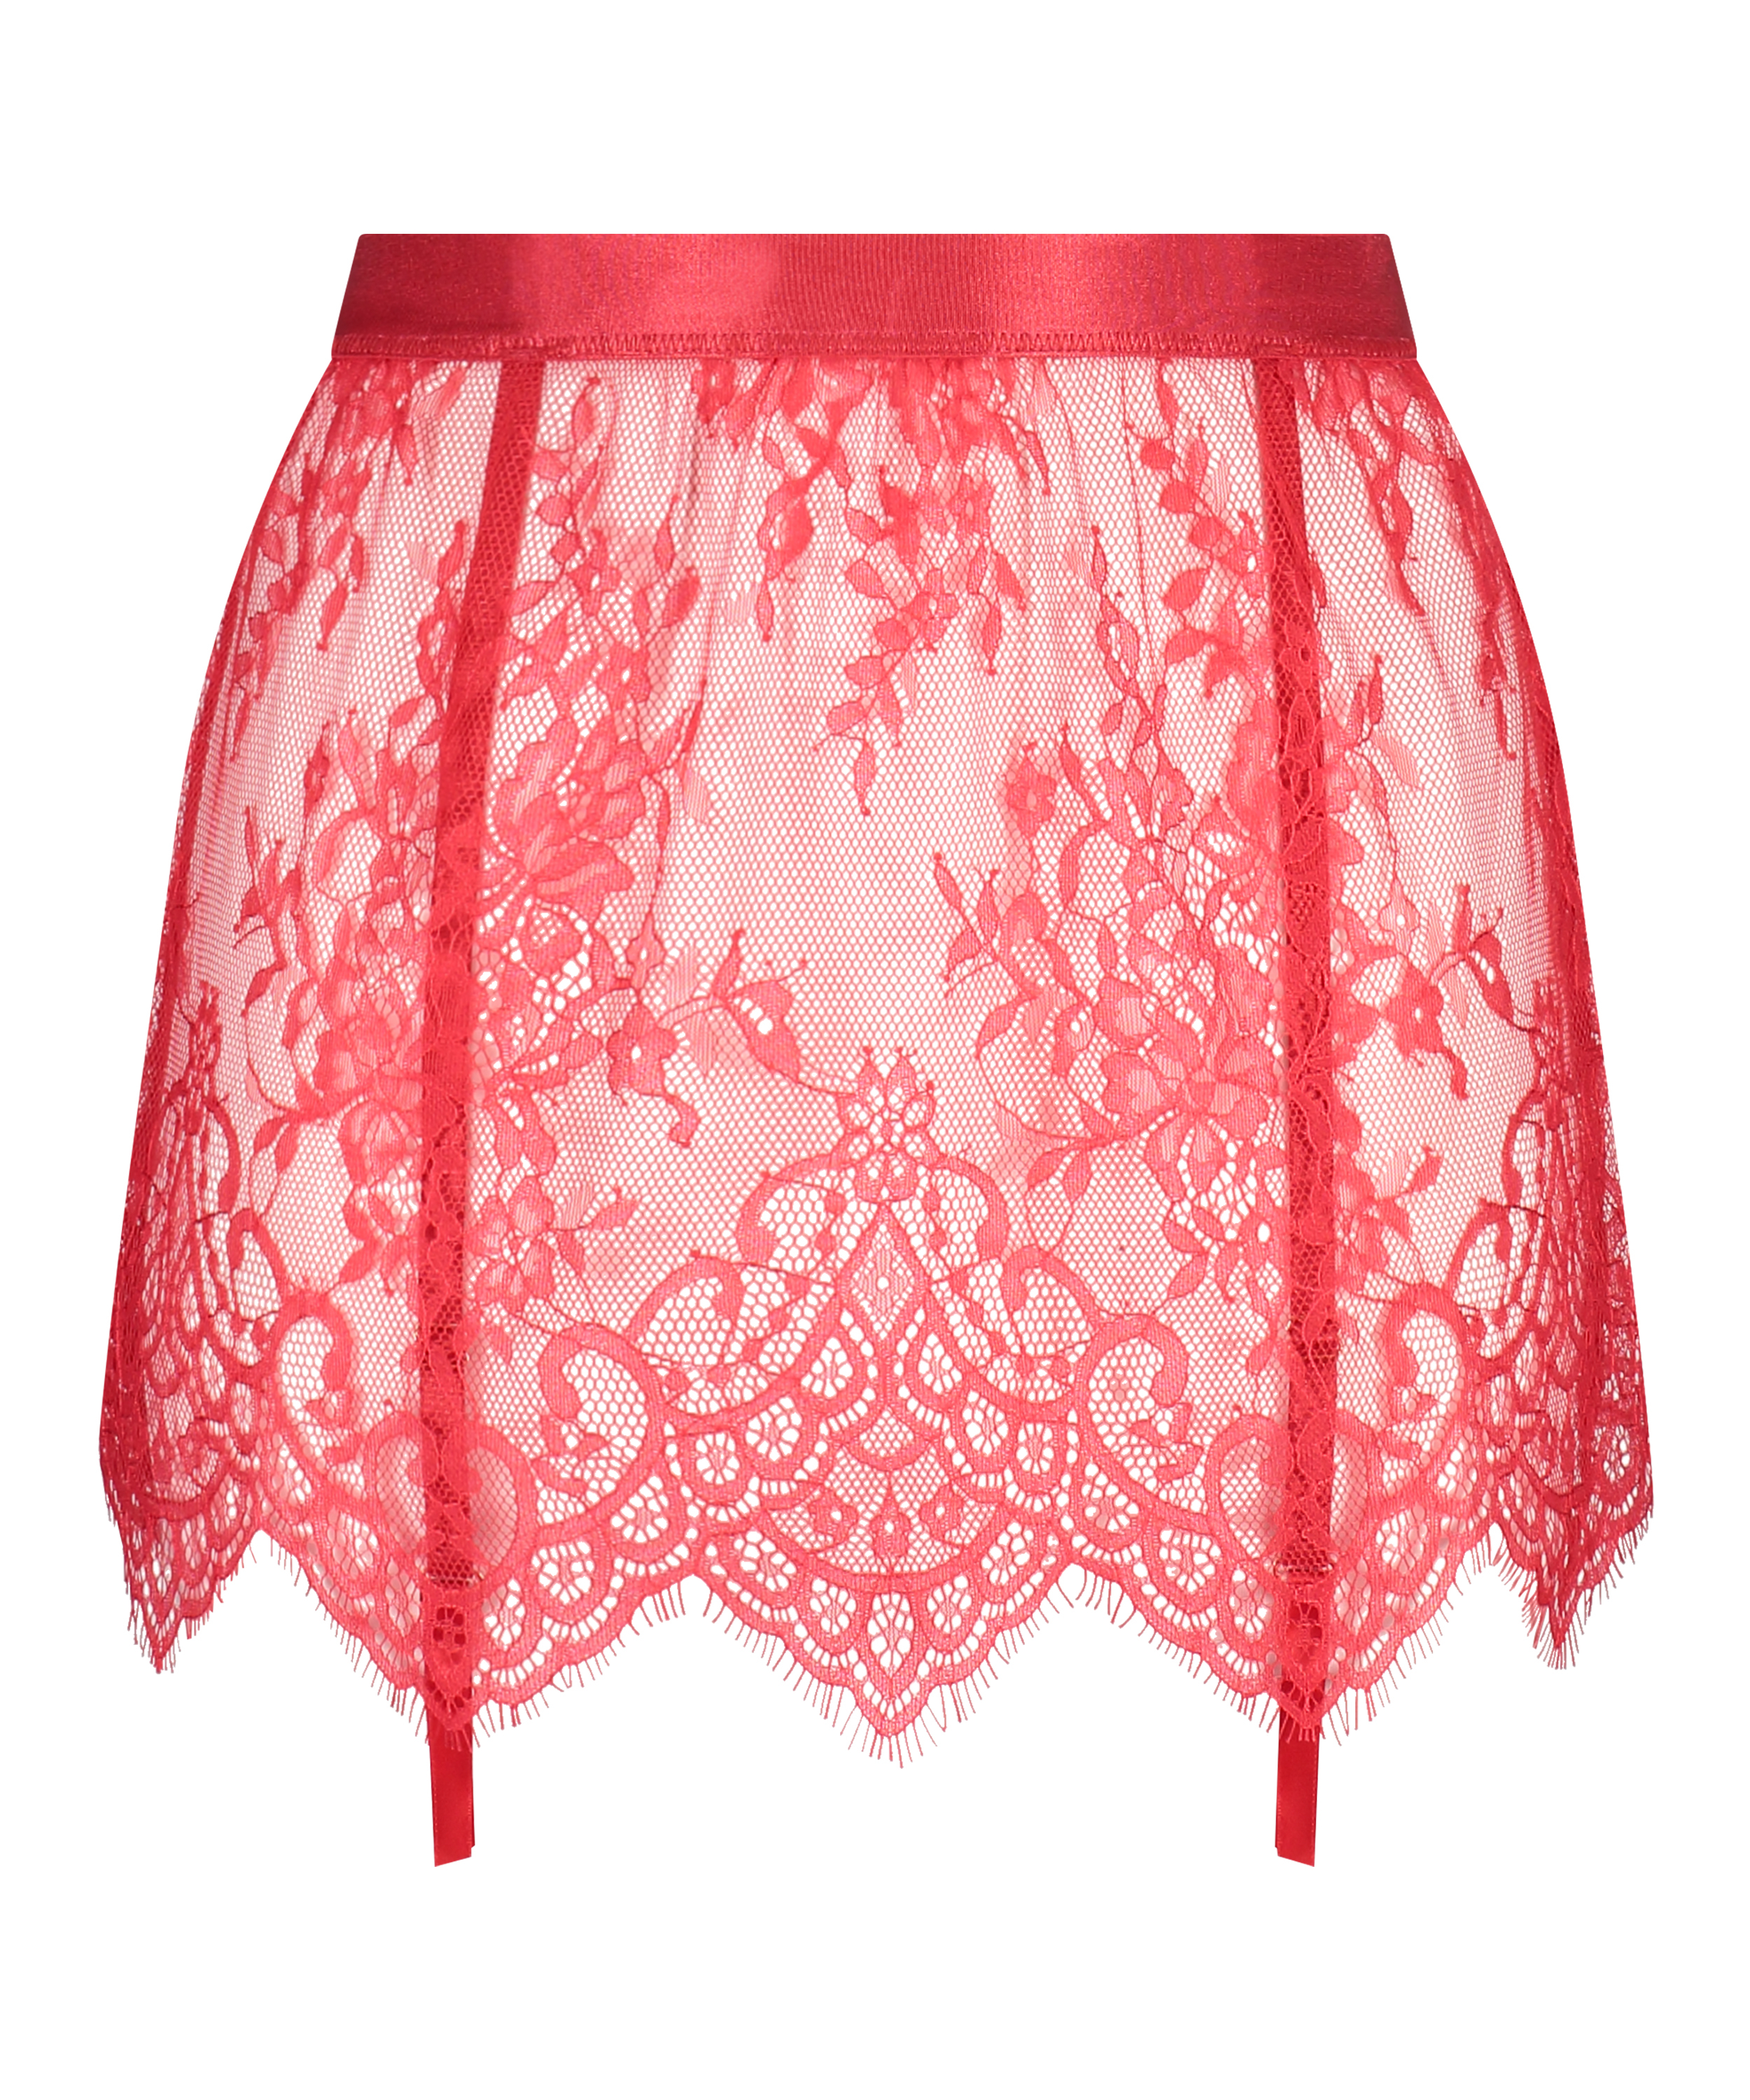 Lace Skirt, Red, main